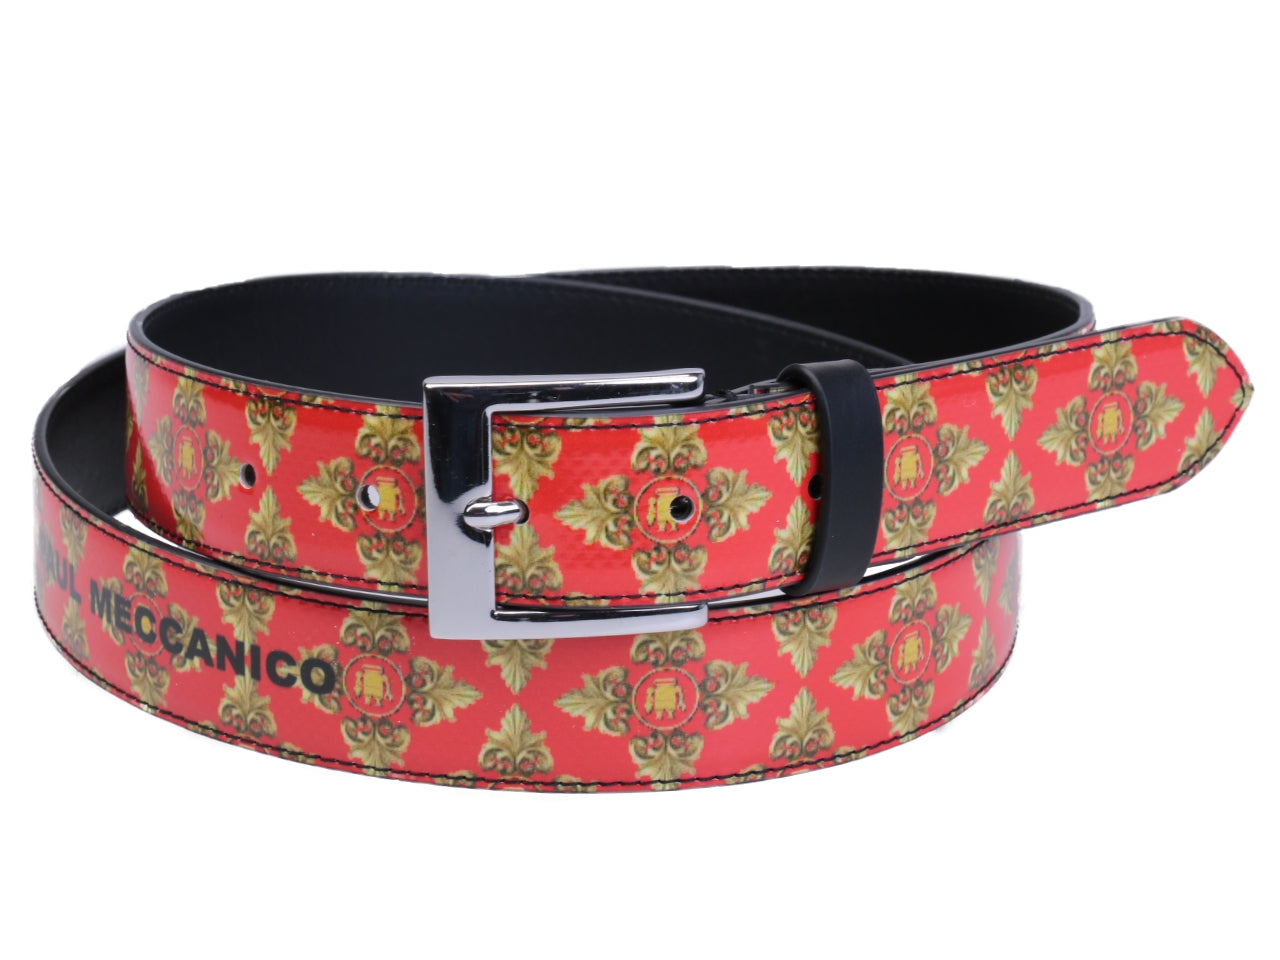 RED WOMEN'S BELT WITH LIBERTY FANTASY MADE OF LORRY TARPAULIN. - Unique Pieces Paul Meccanico